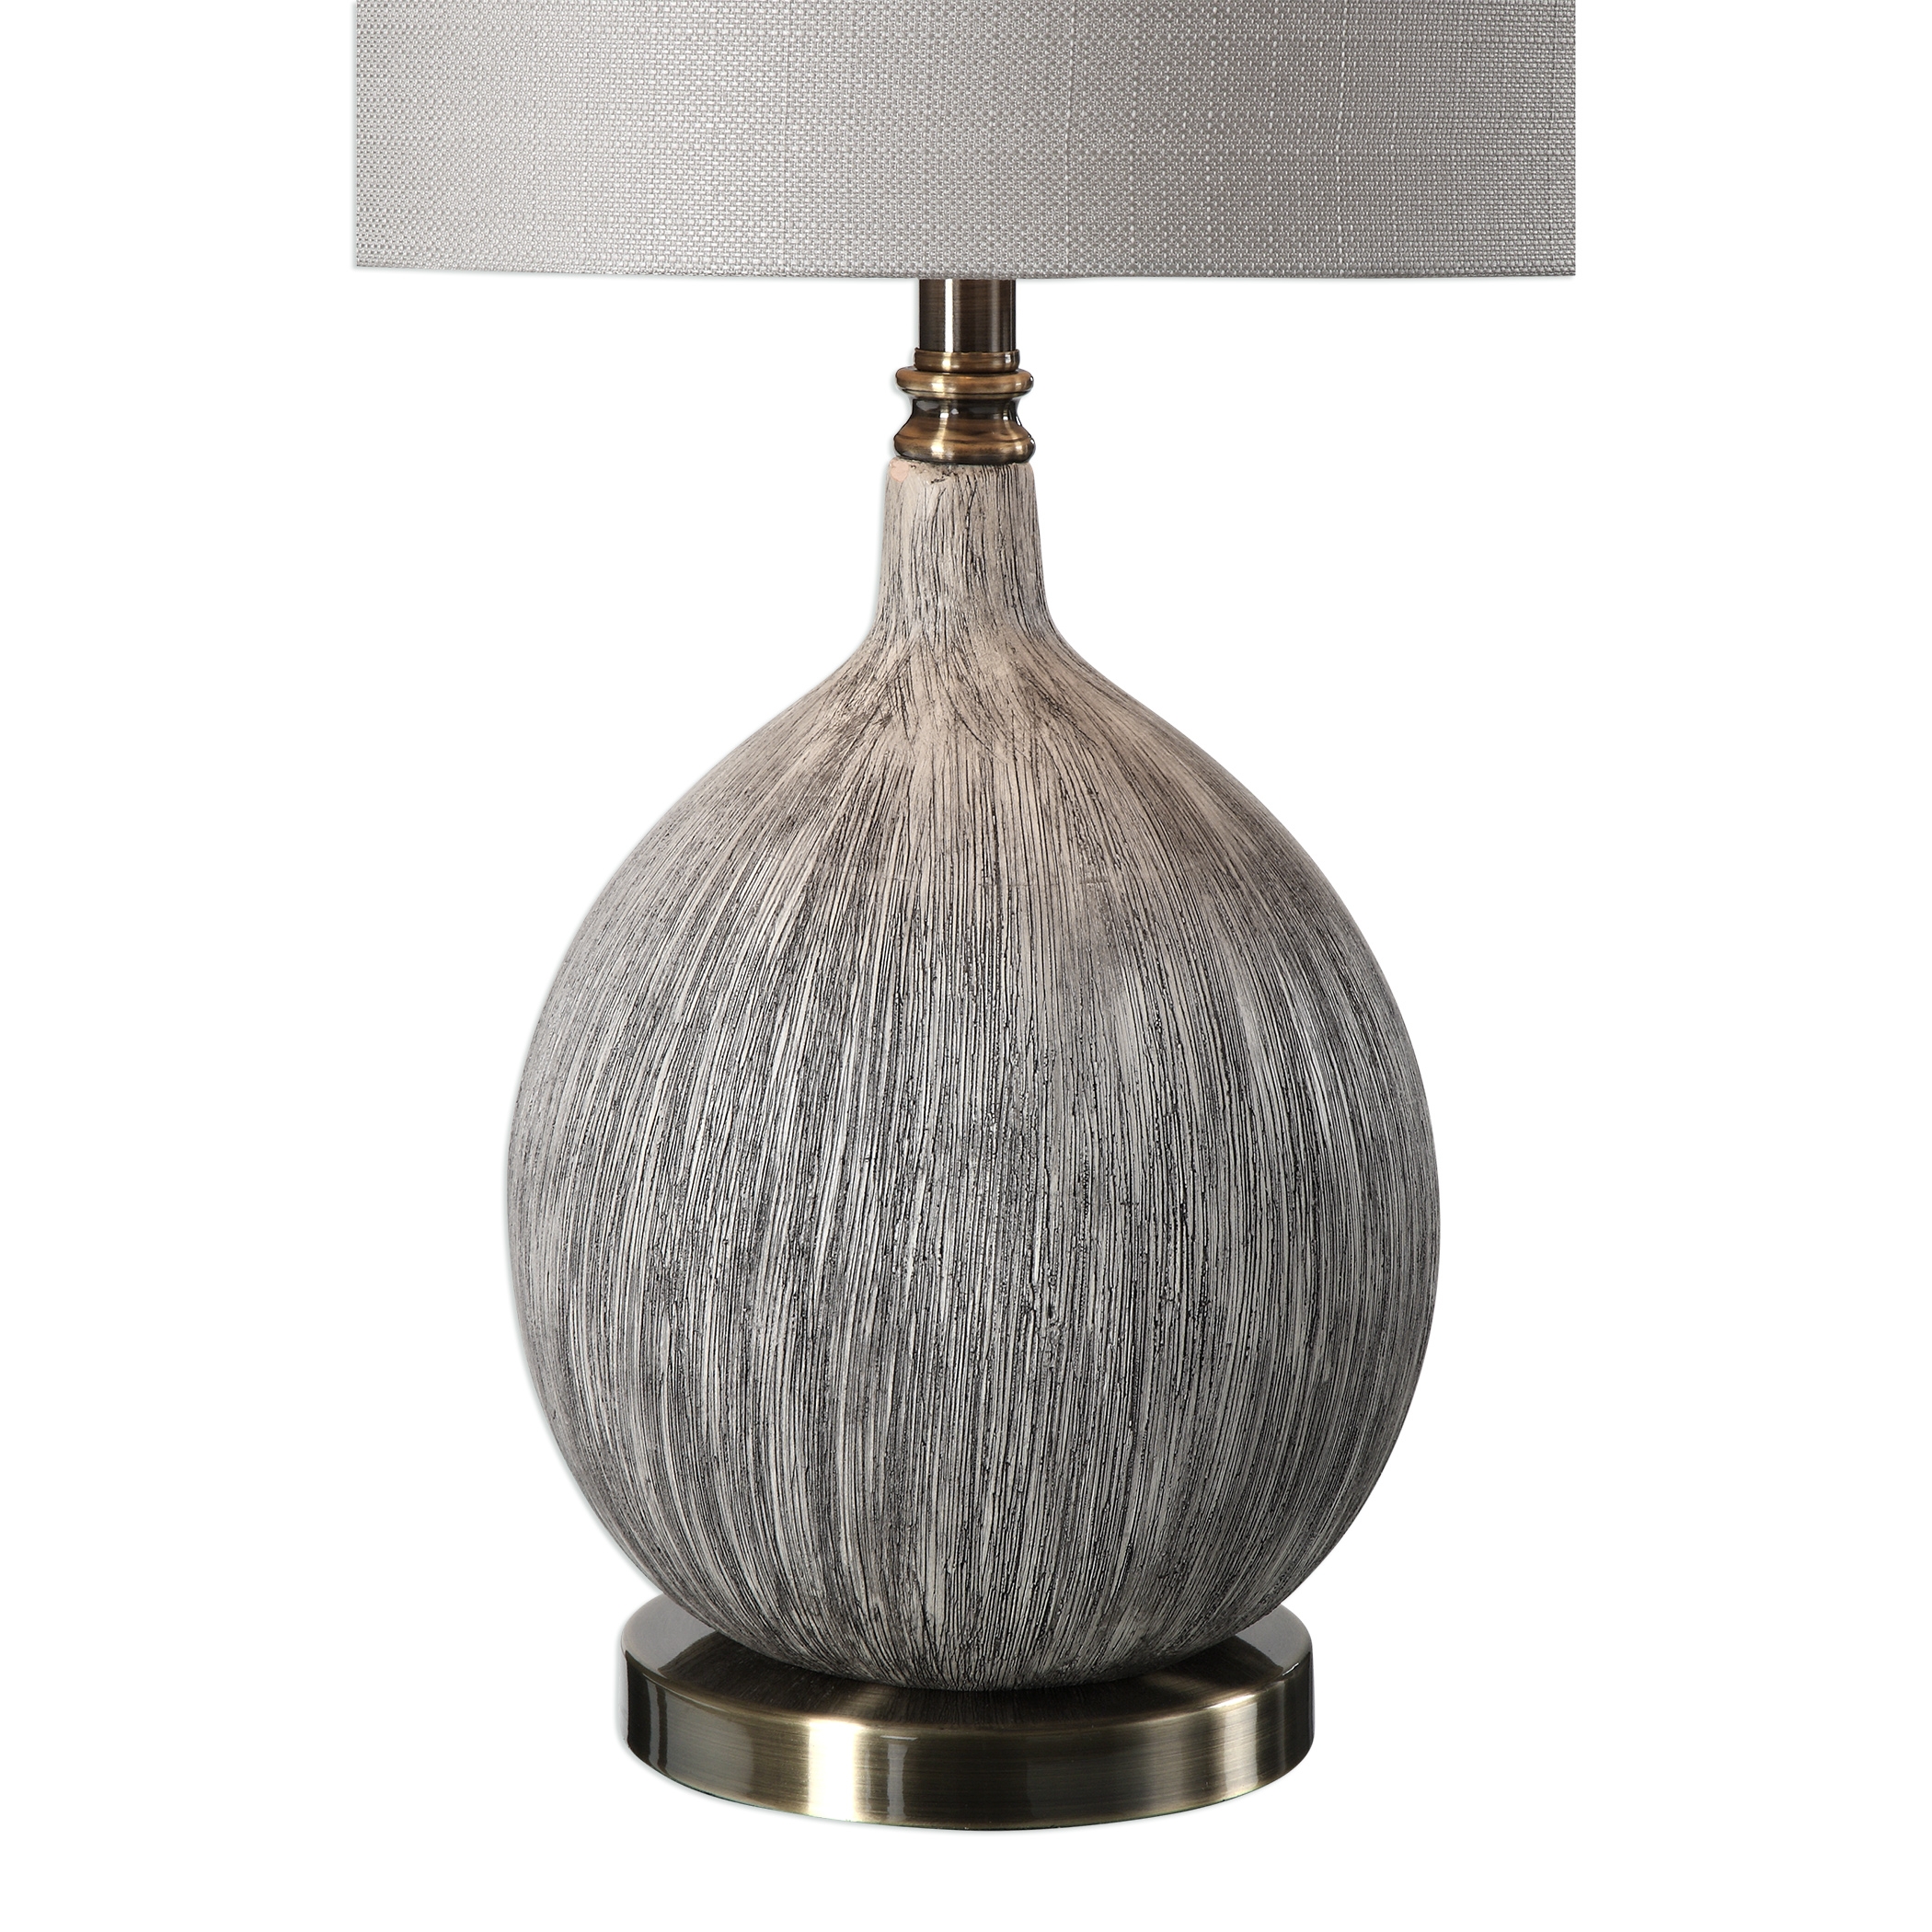 Hedera Textured Ivory Table Lamp, 14" x 14" x 26.5" - Image 1